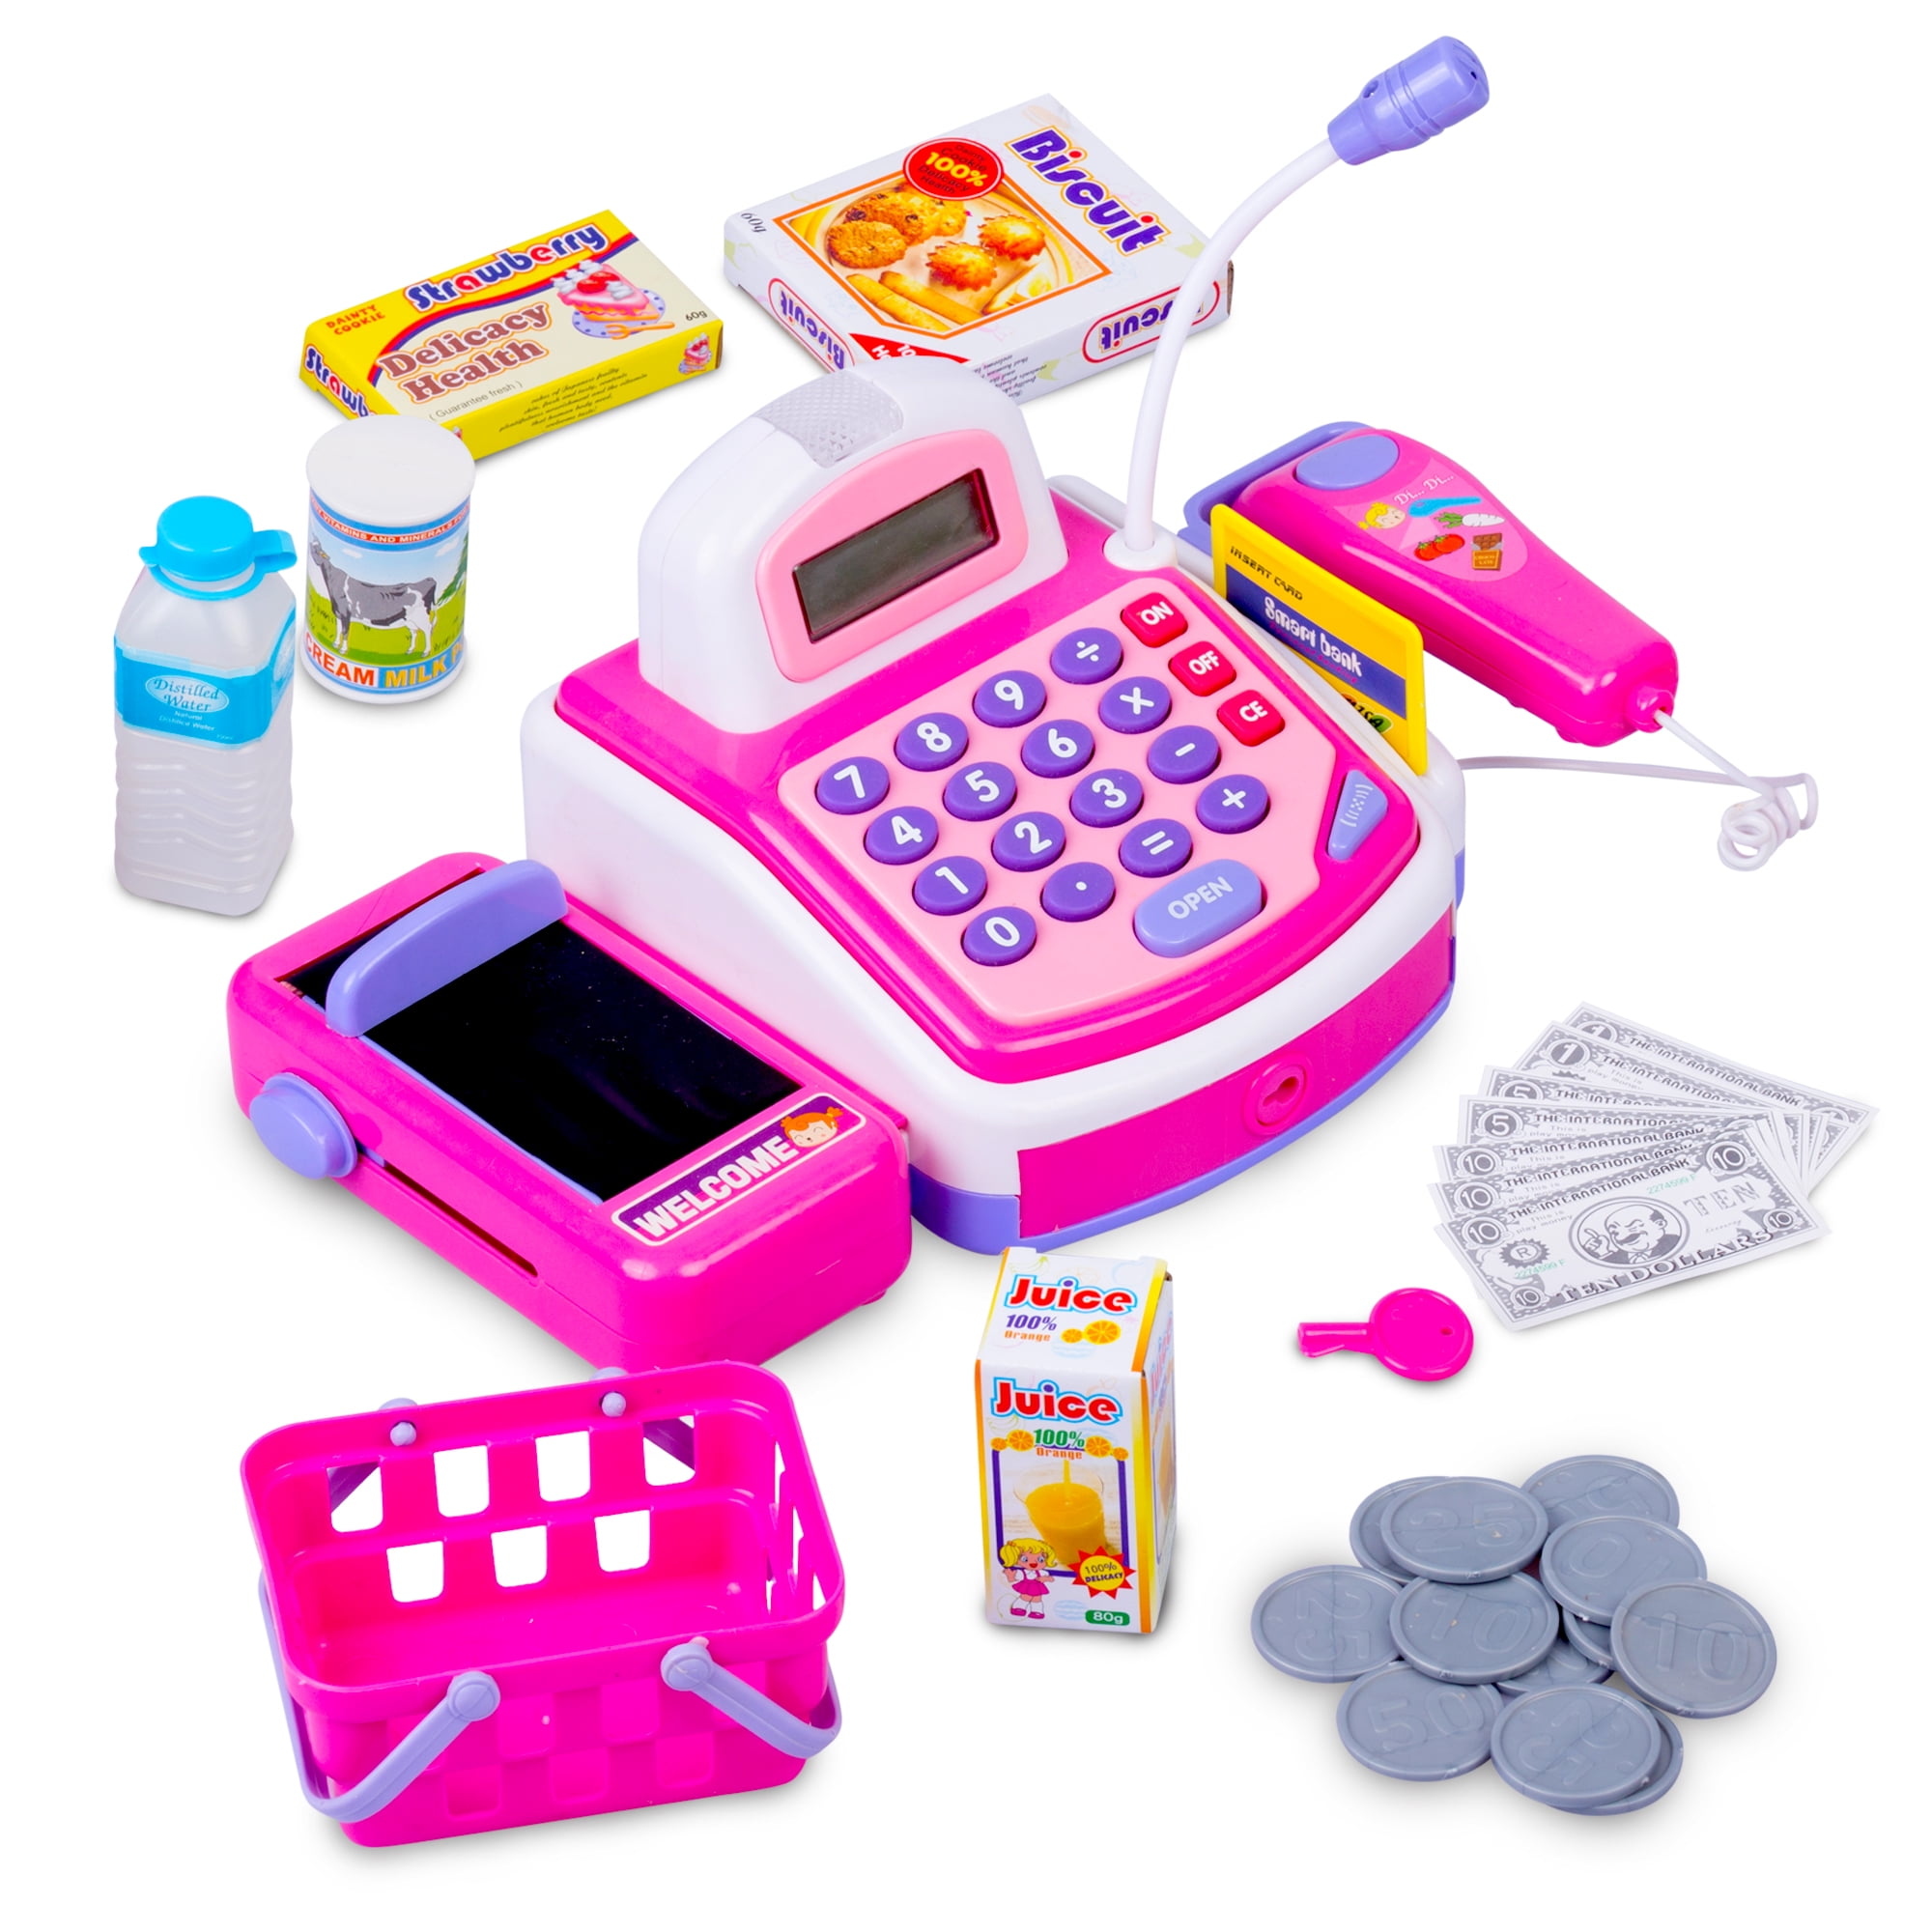 Buy CifToys Toy Cash Register for Kids, Pink Cashier Toy Playset for Girls  3 Online at Lowest Price in Pakistan. 510768637